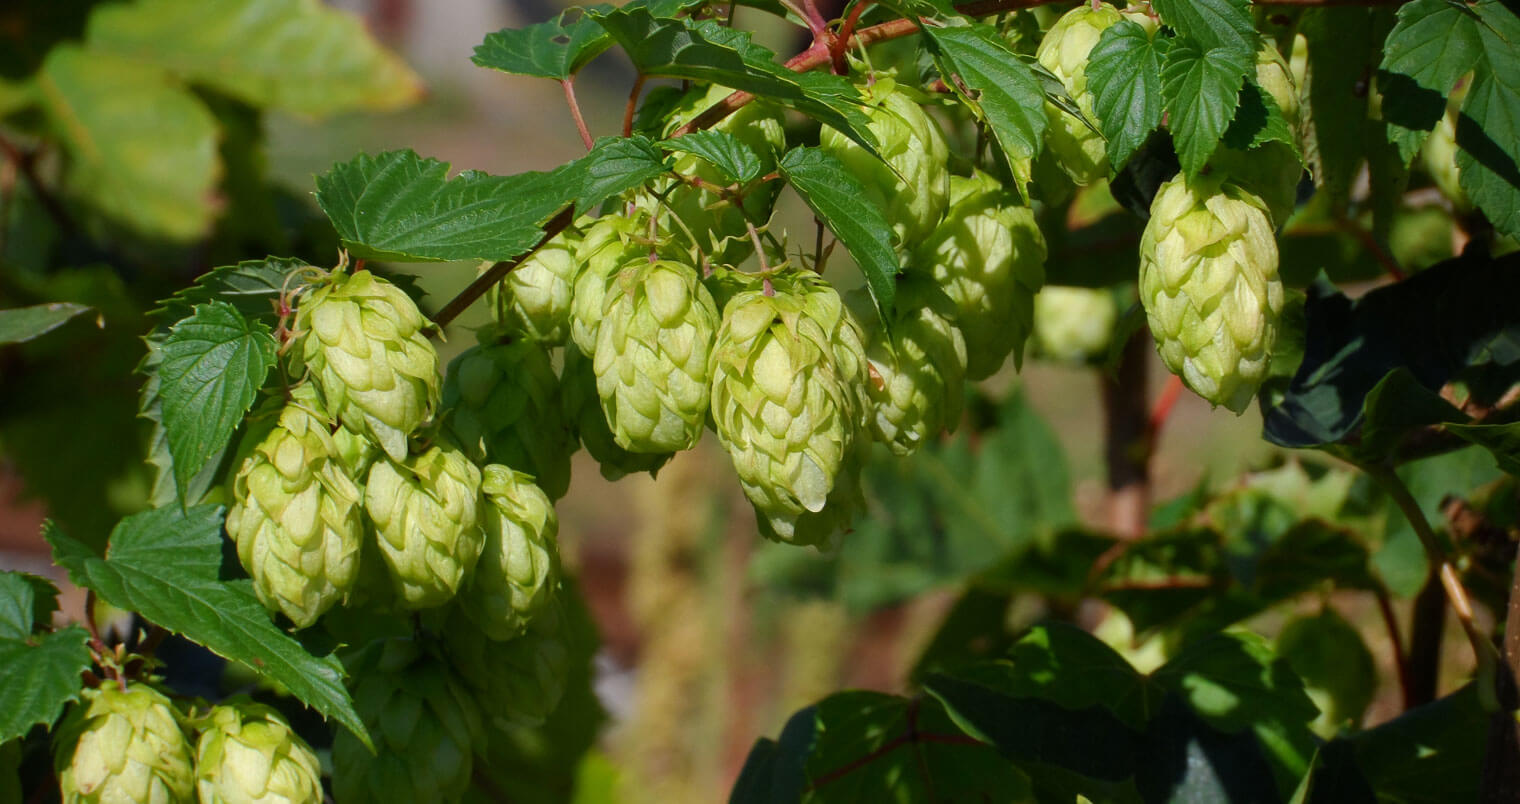 Hops buds on plant, featured image